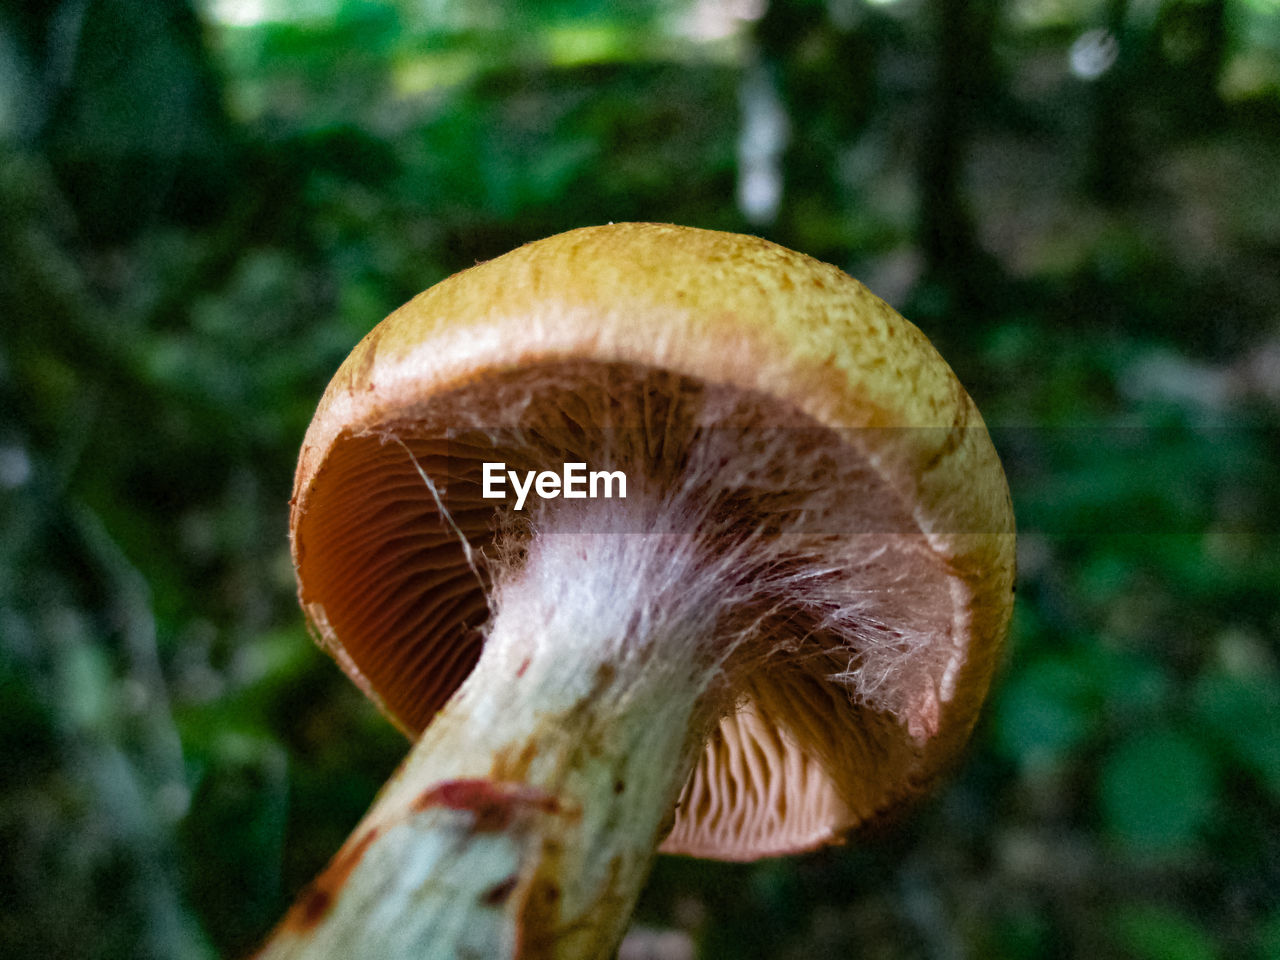 Cobweb mushroom growing in the forest